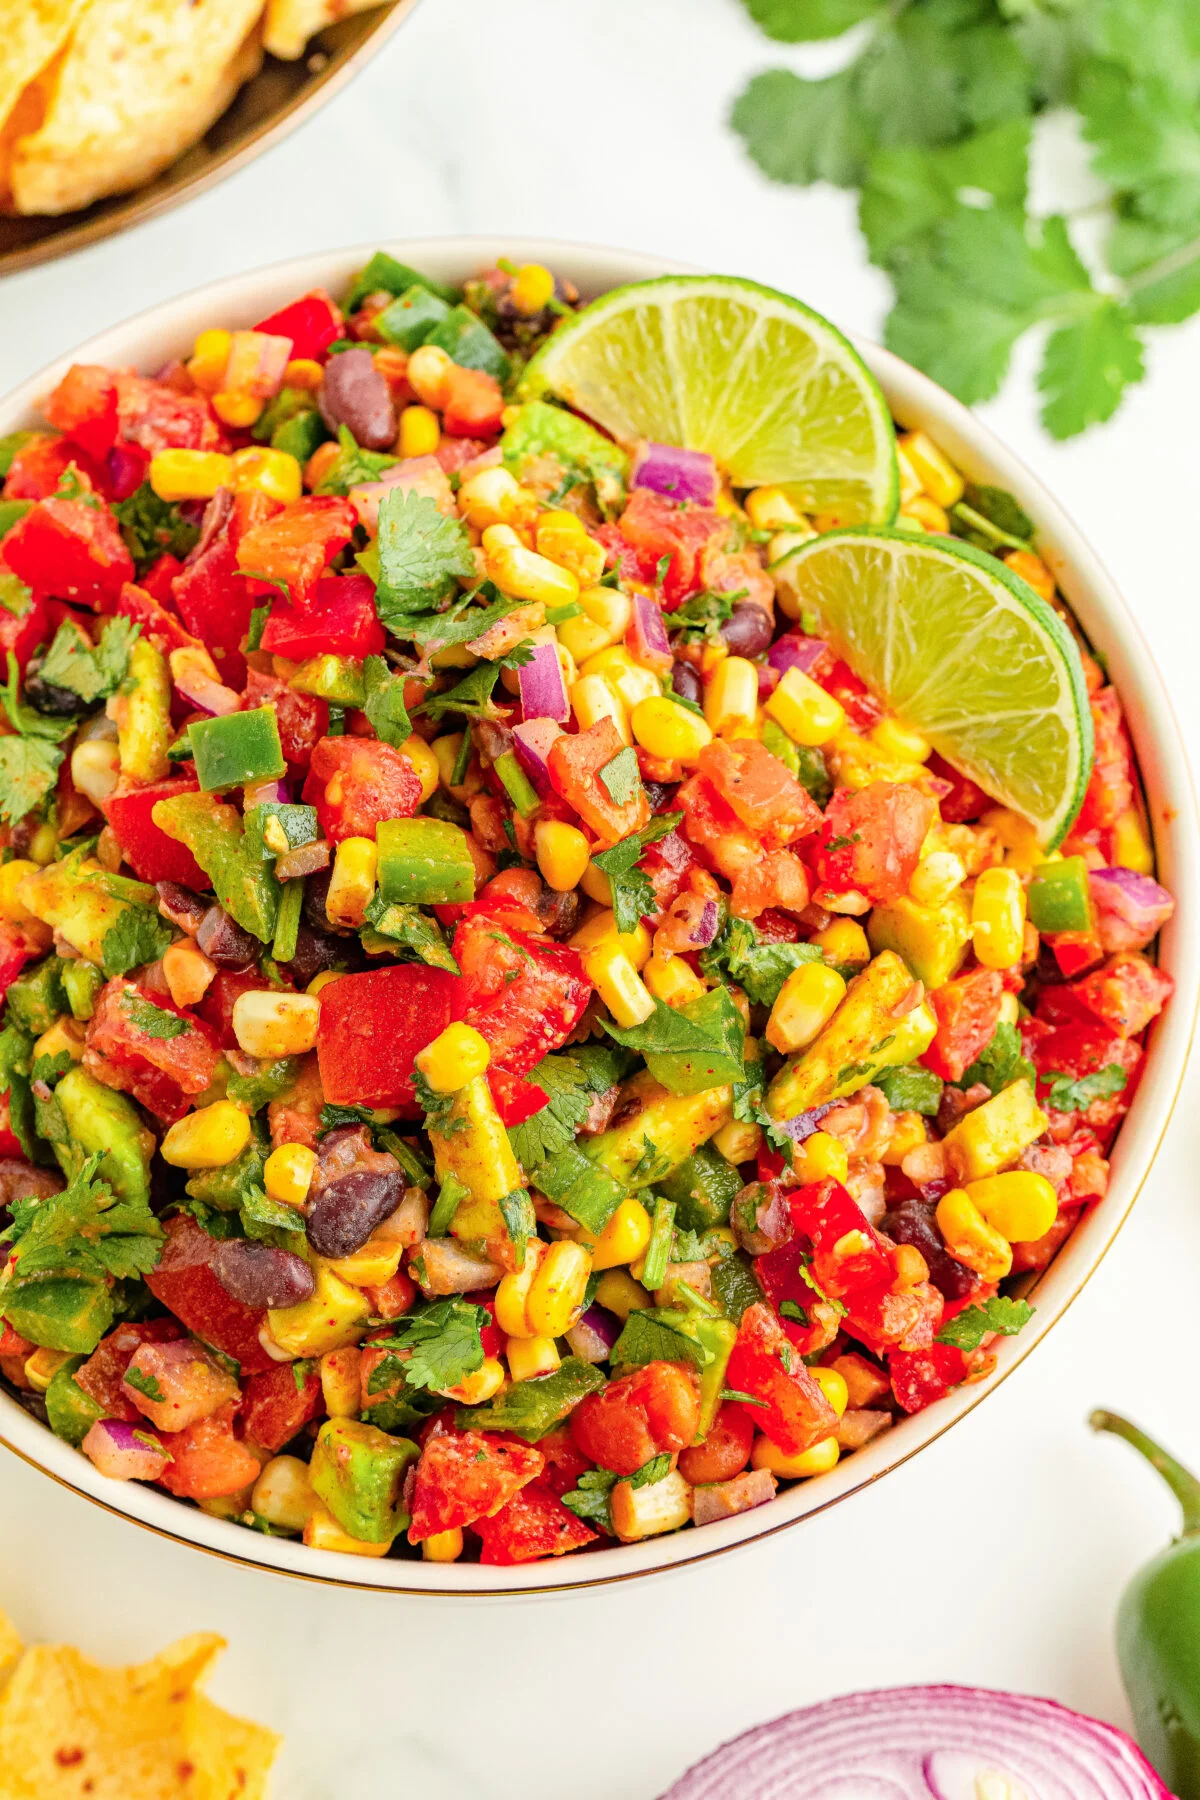 Discover a hearty cowboy caviar recipe, loaded with beans and fresh produce tossed in zesty lime dressing for a delicious, flavoursome dish.